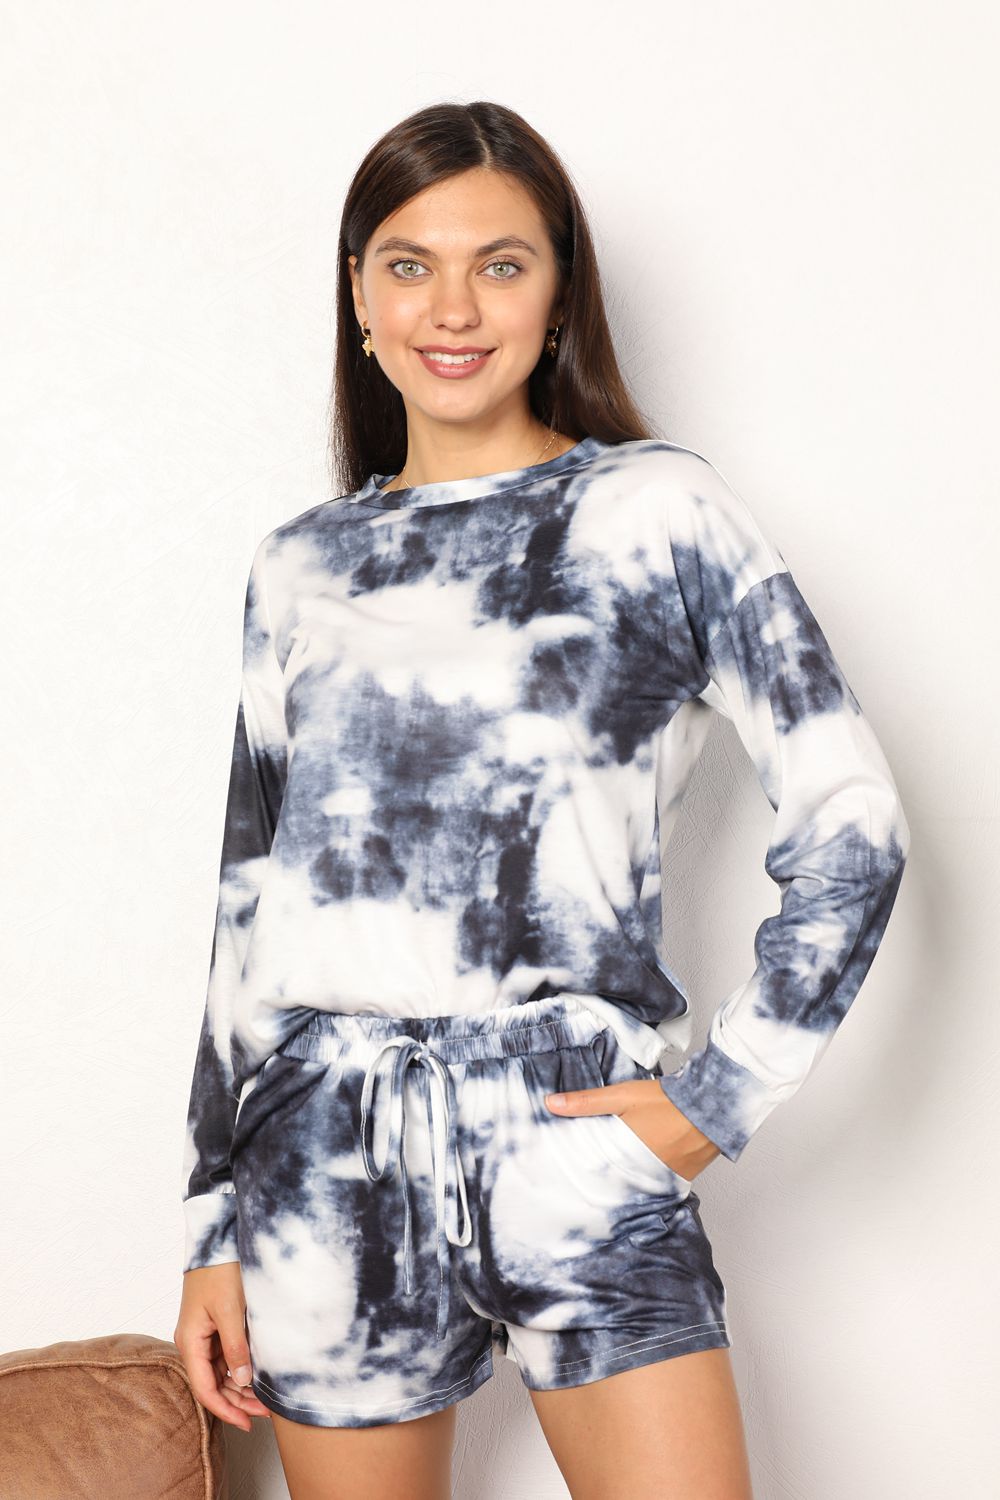 Double Take Tie-Dye Round Neck Top and Shorts Lounge Set - nailedmoms